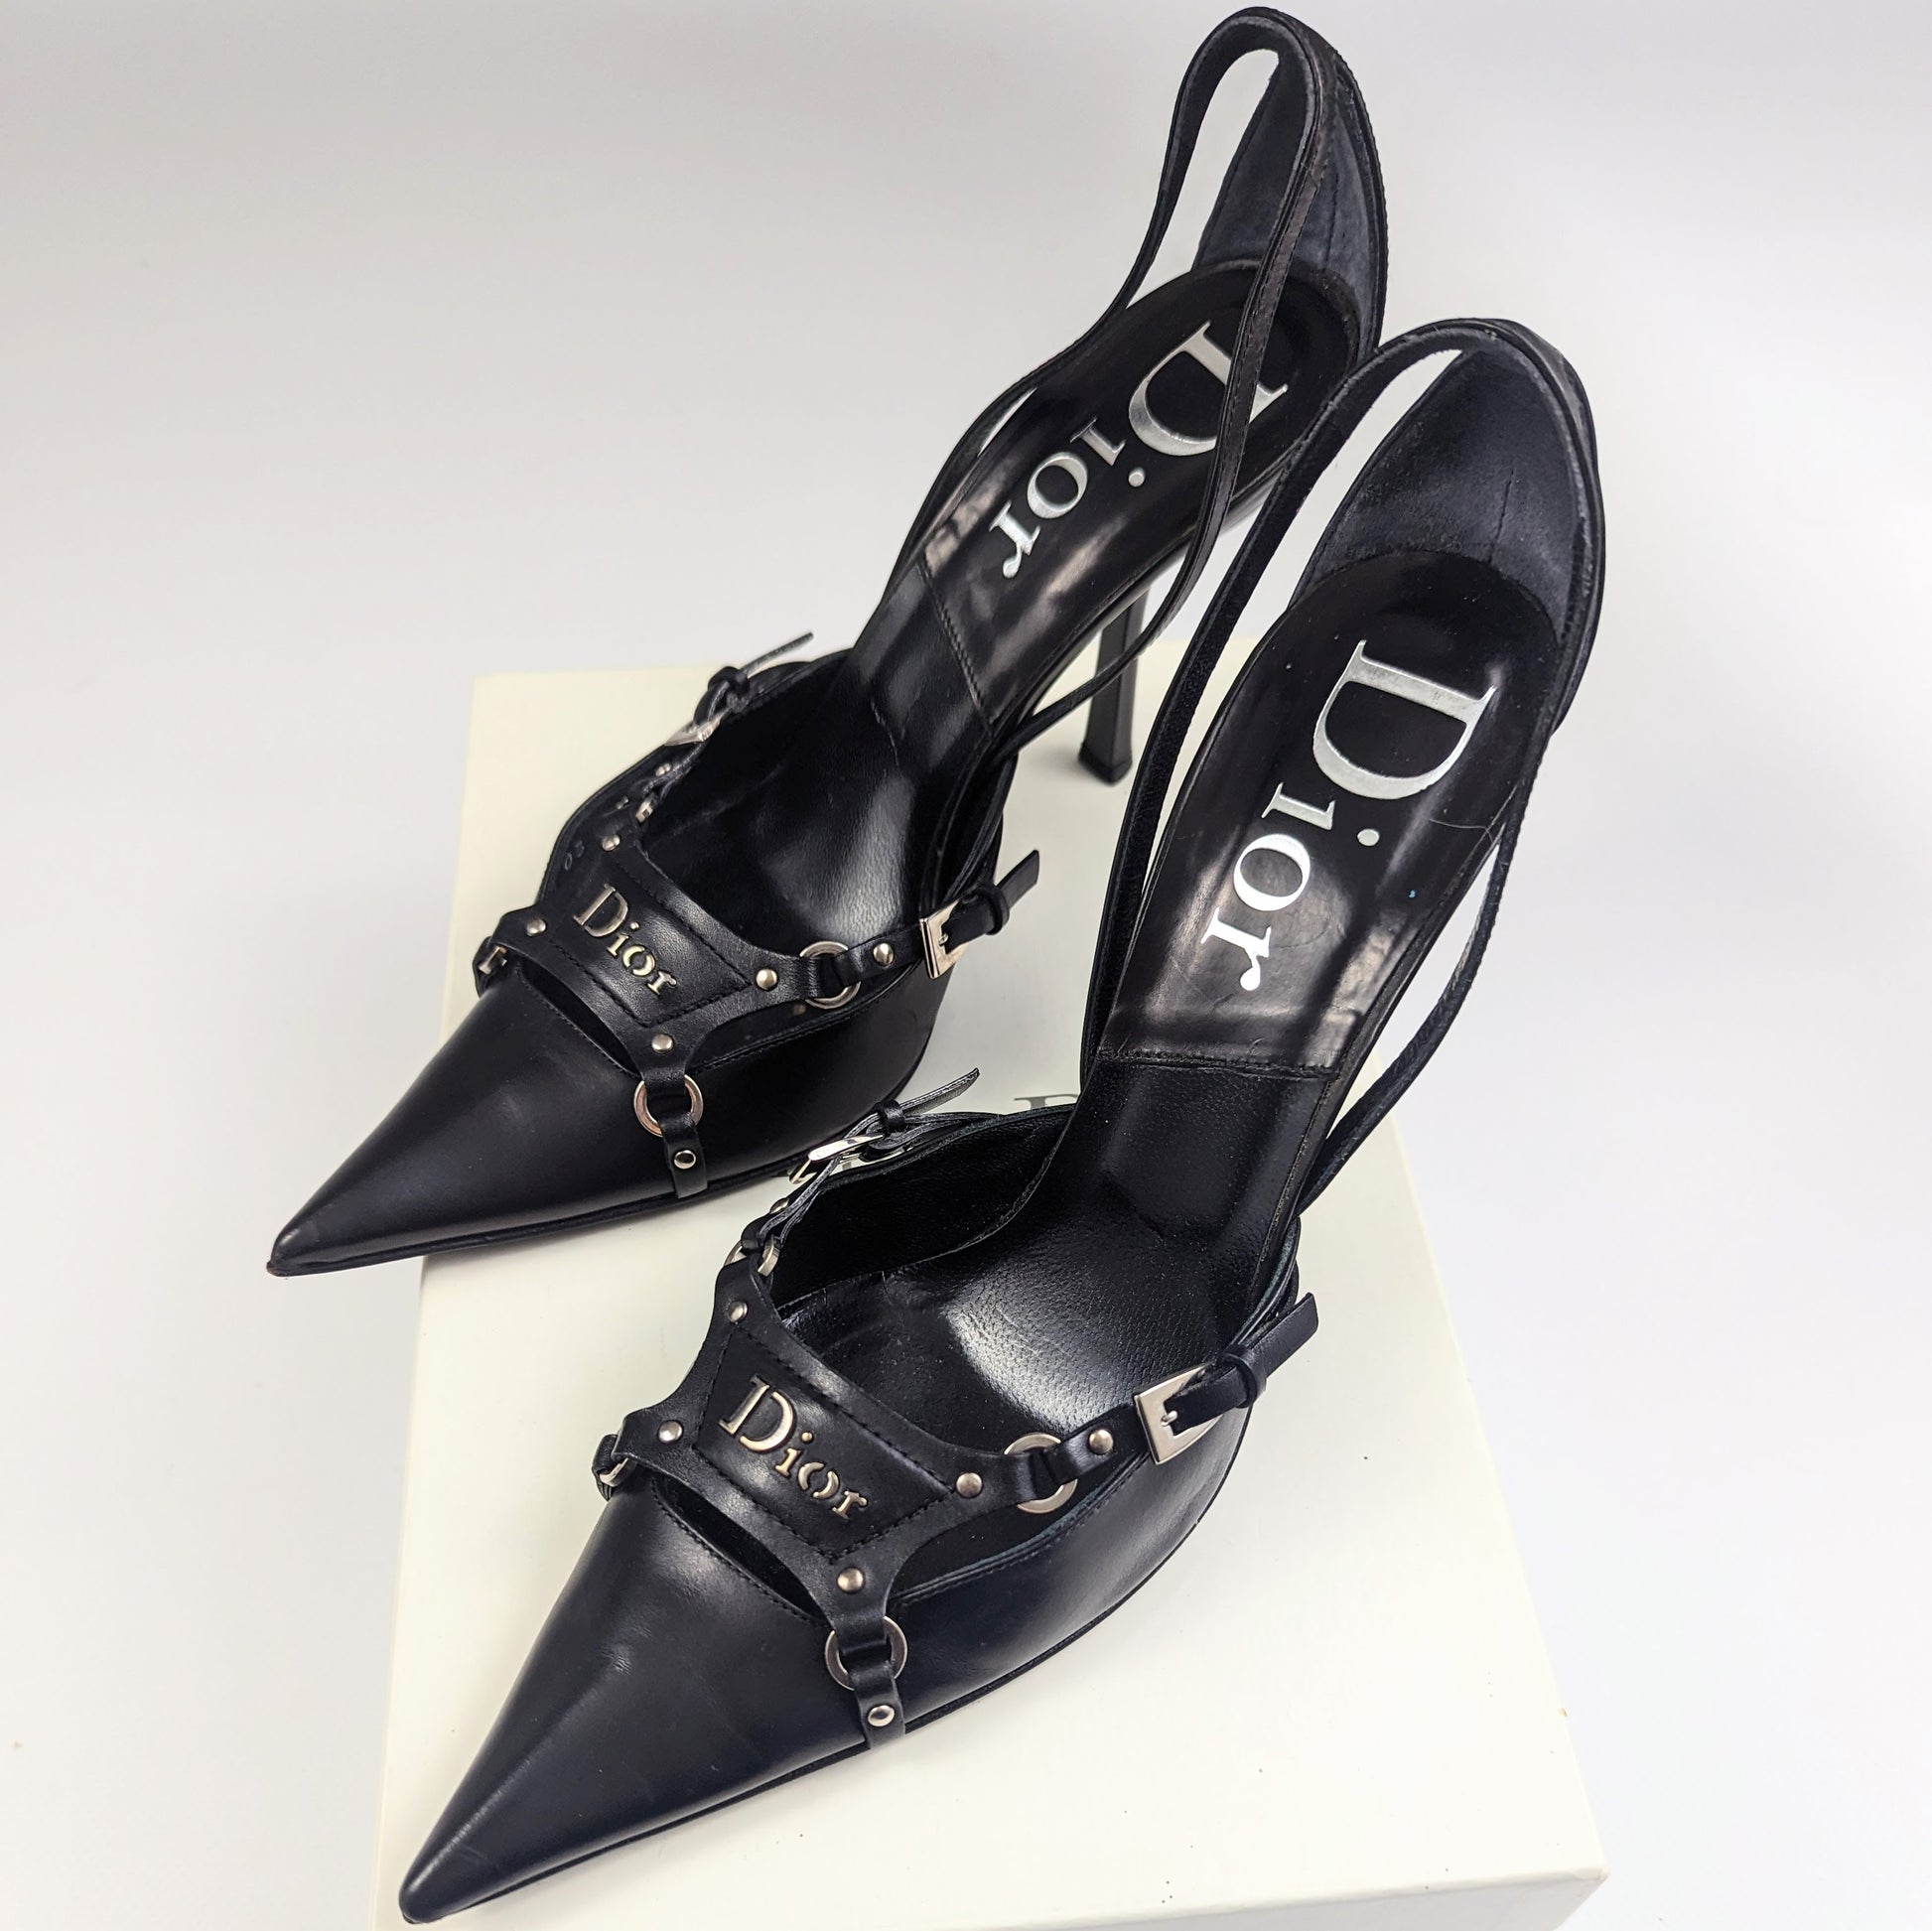 New John Galliano for Christian Dior F/W 2004 *The Gambler* Shoes Sandals 38